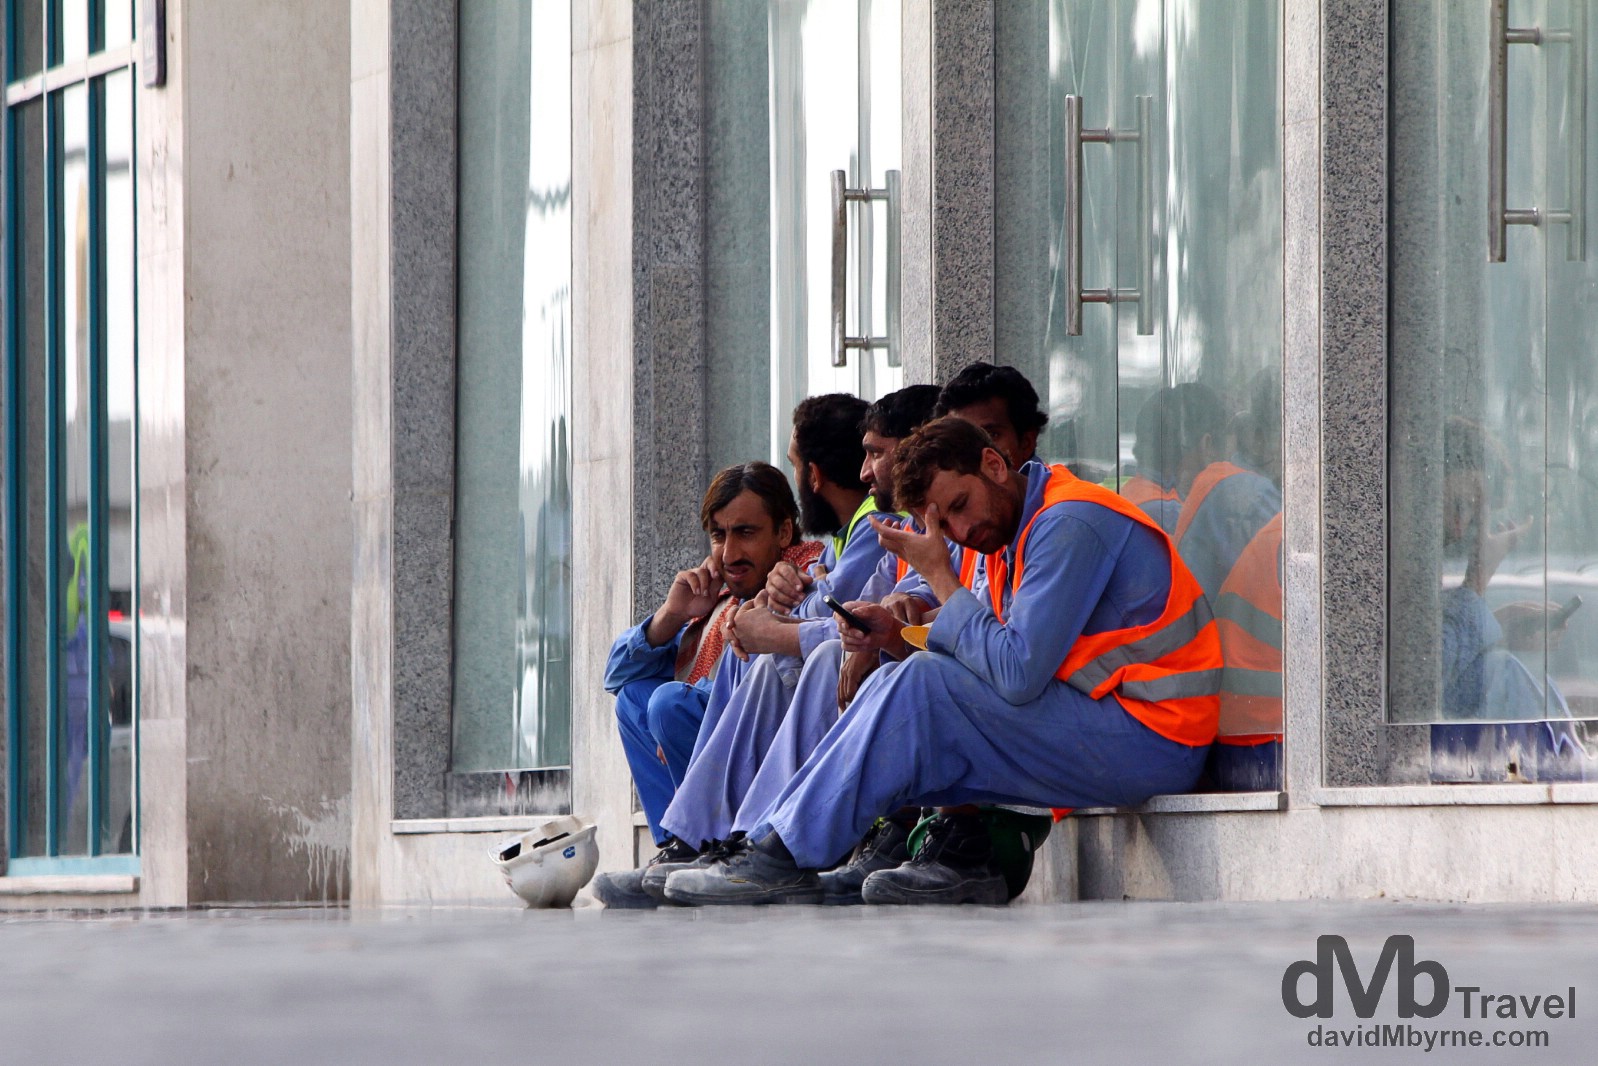 Constructions workers on the streets of Abu Dhabi after days work in the desert heat. Abu Dhabi, UAE. April 23rd, 2014.